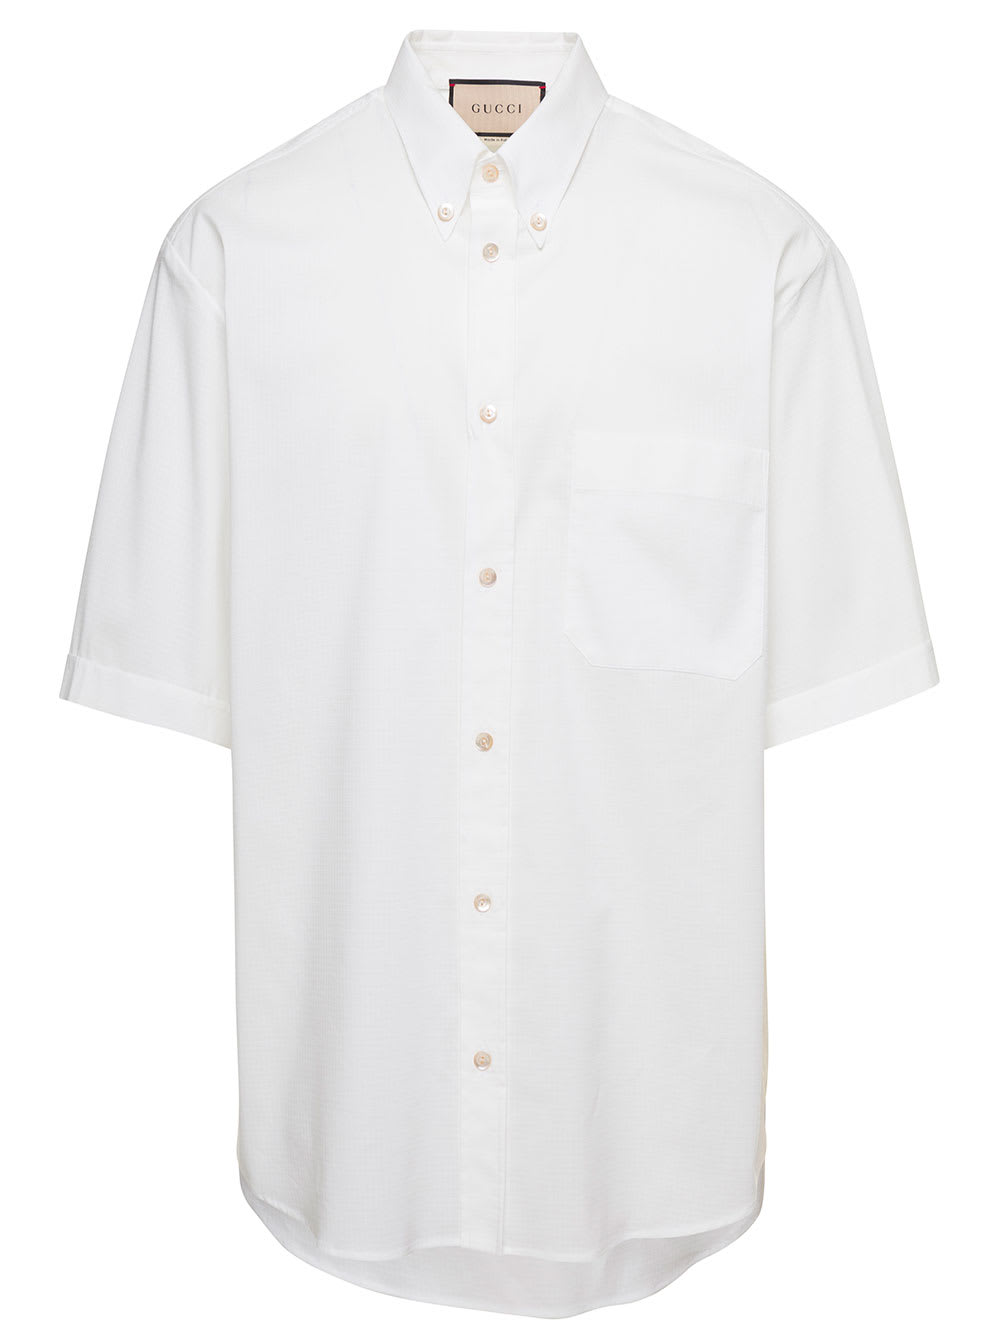 GUCCI WHITE SHORT SLEEVED T-SHIRT WITH REAR LOGO PATCH AND BUTTON-DOWN COLLAR IN COTTON BLEND MAN